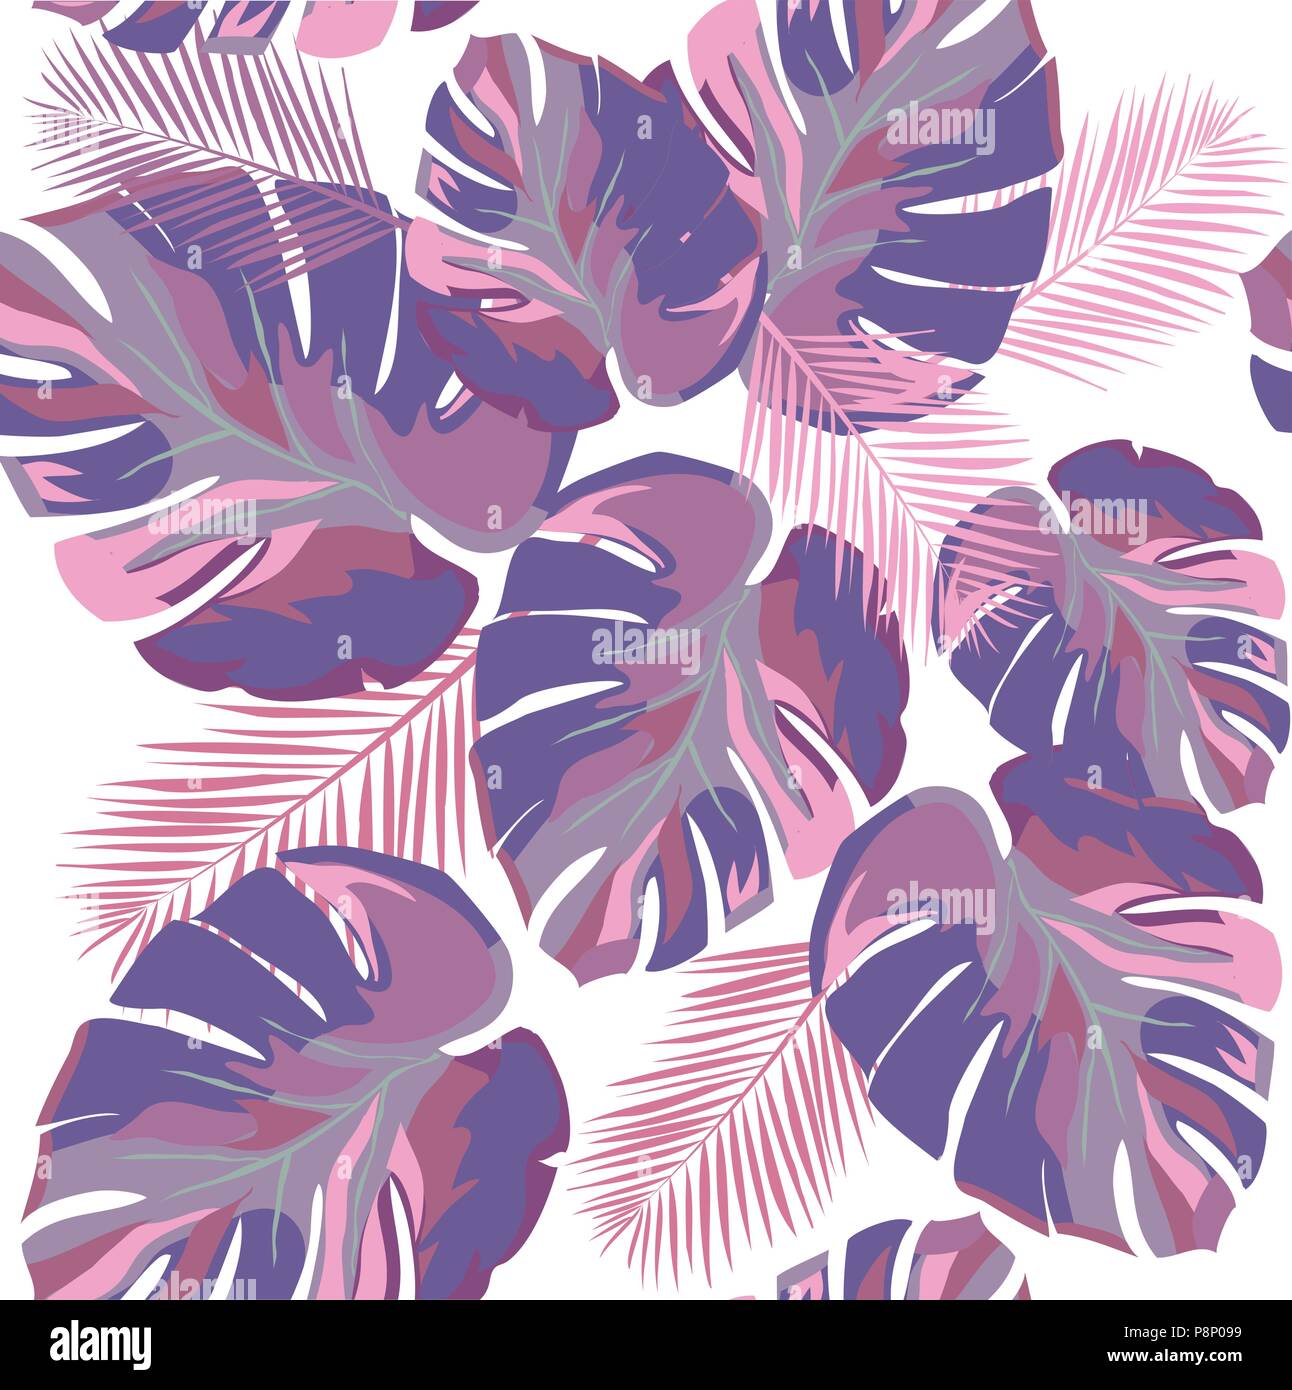 vector illustration of ultra violet palm leaves seamless background. Stock Vector